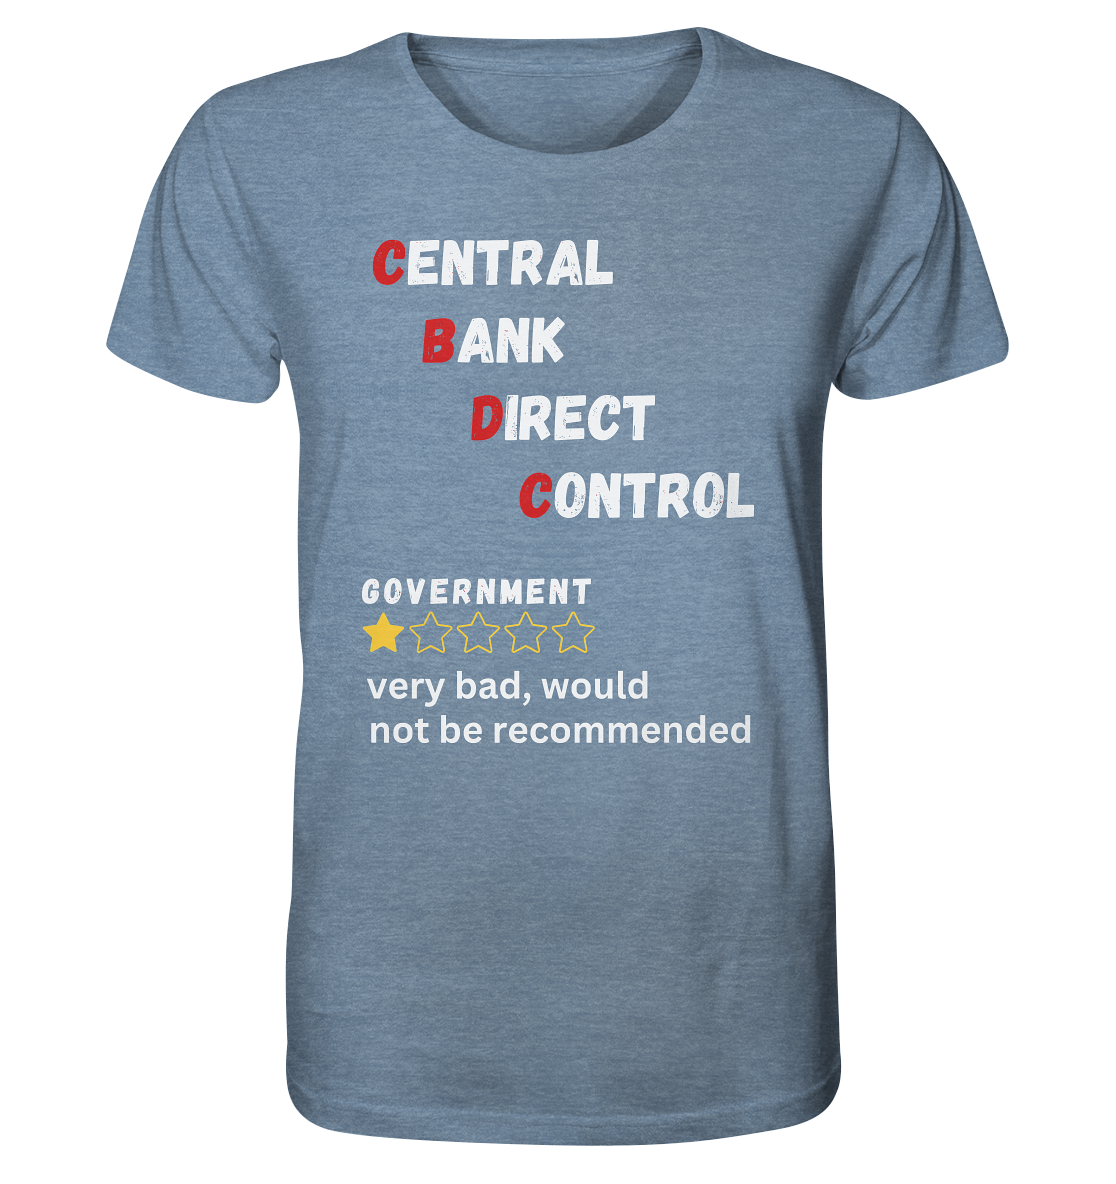 CENTRAL BANK DIRECT CONTROL - GOVERNMENT...not be recommended - STUDY BITCOIN  - Organic Shirt (meliert)